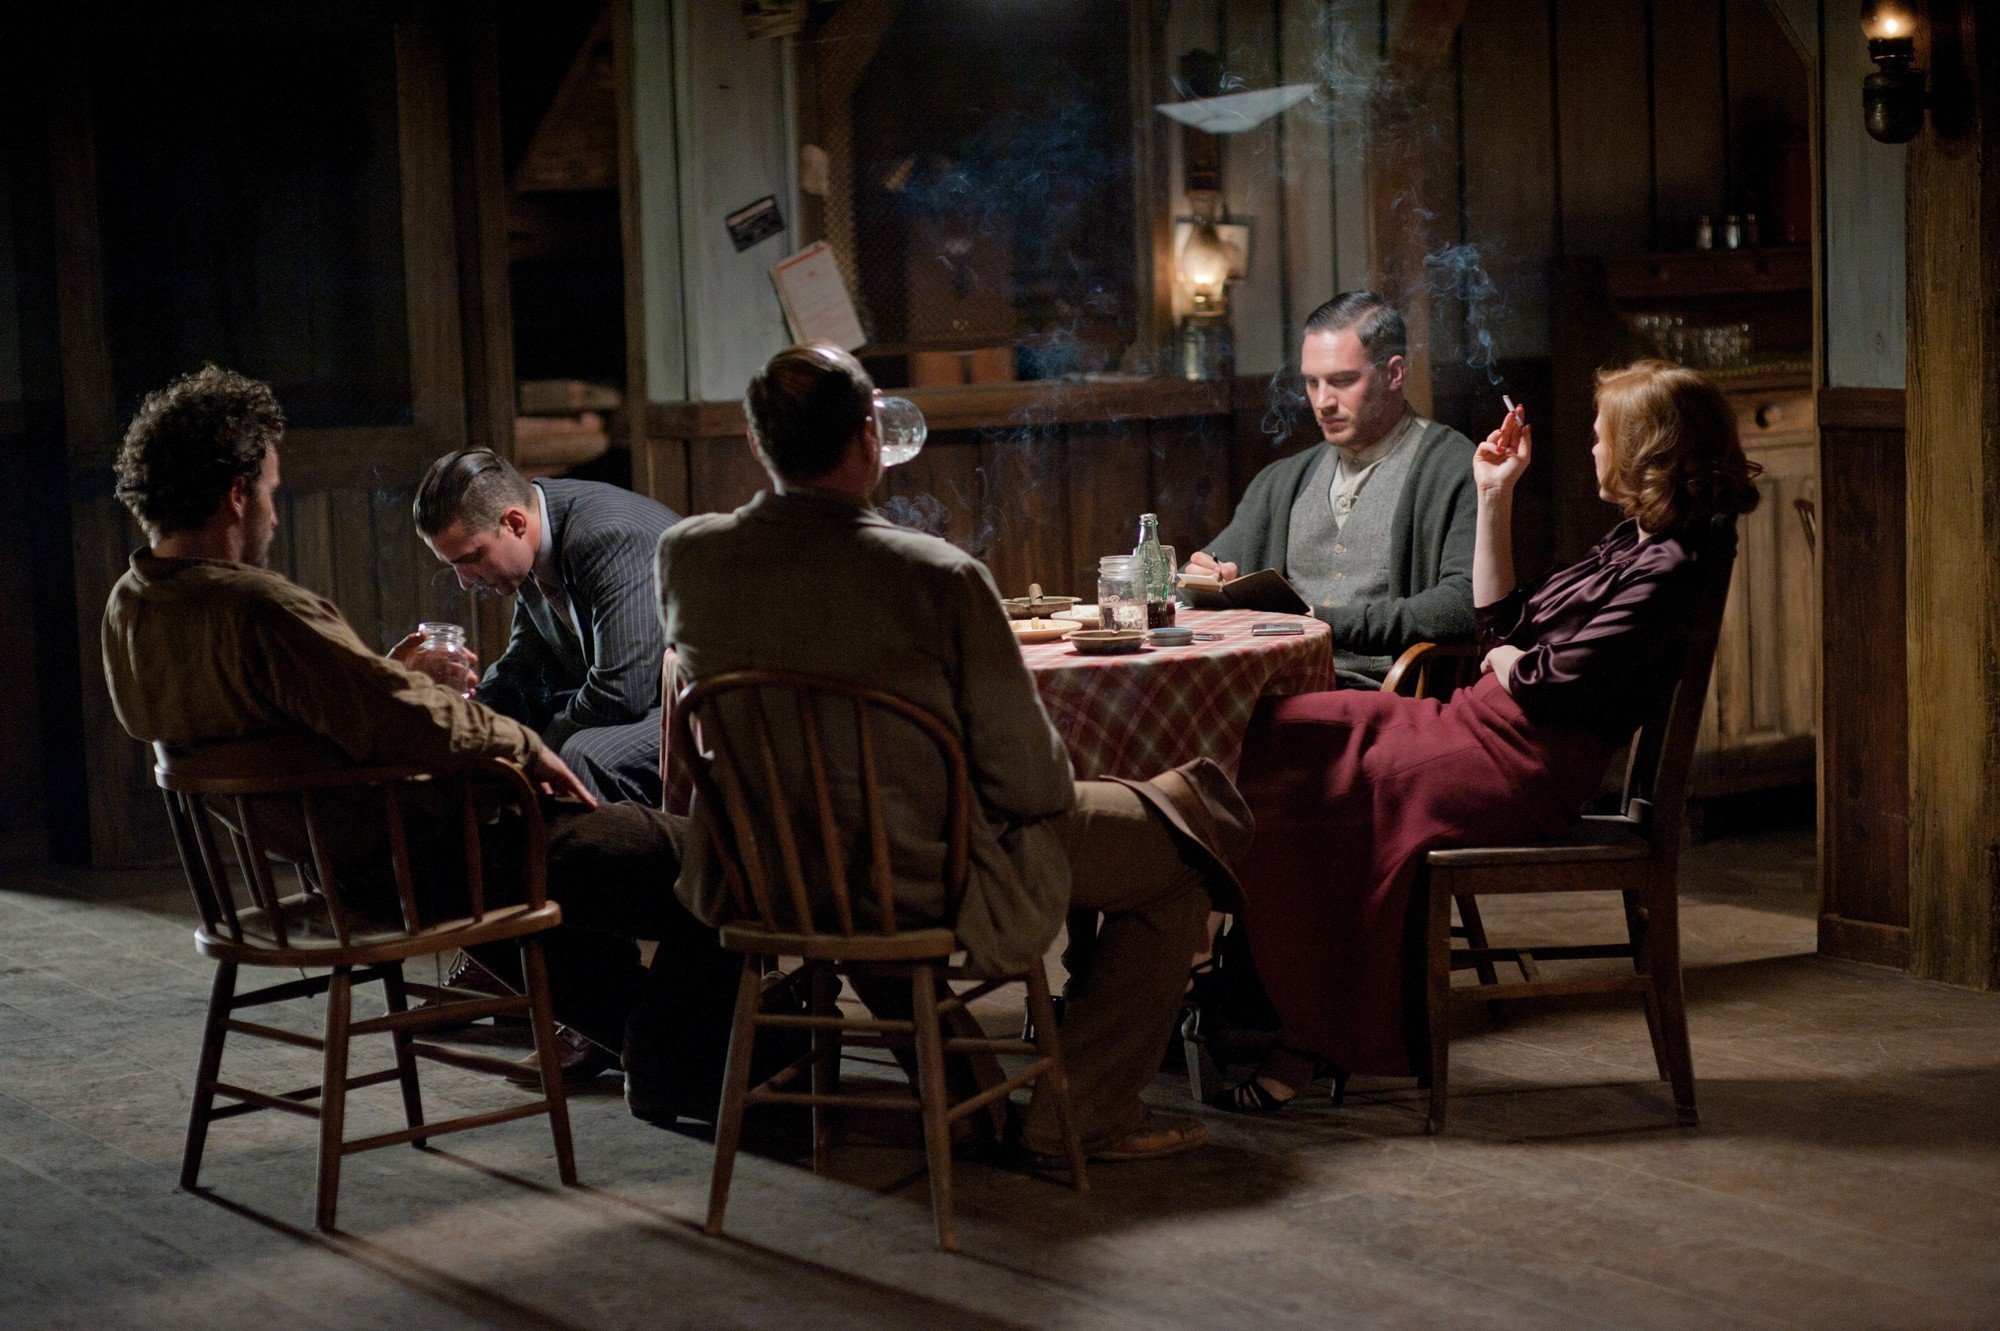 Shia LaBeouf, Tom Hardy and Jessica Chastain in The Weinstein Company's Lawless (2012)